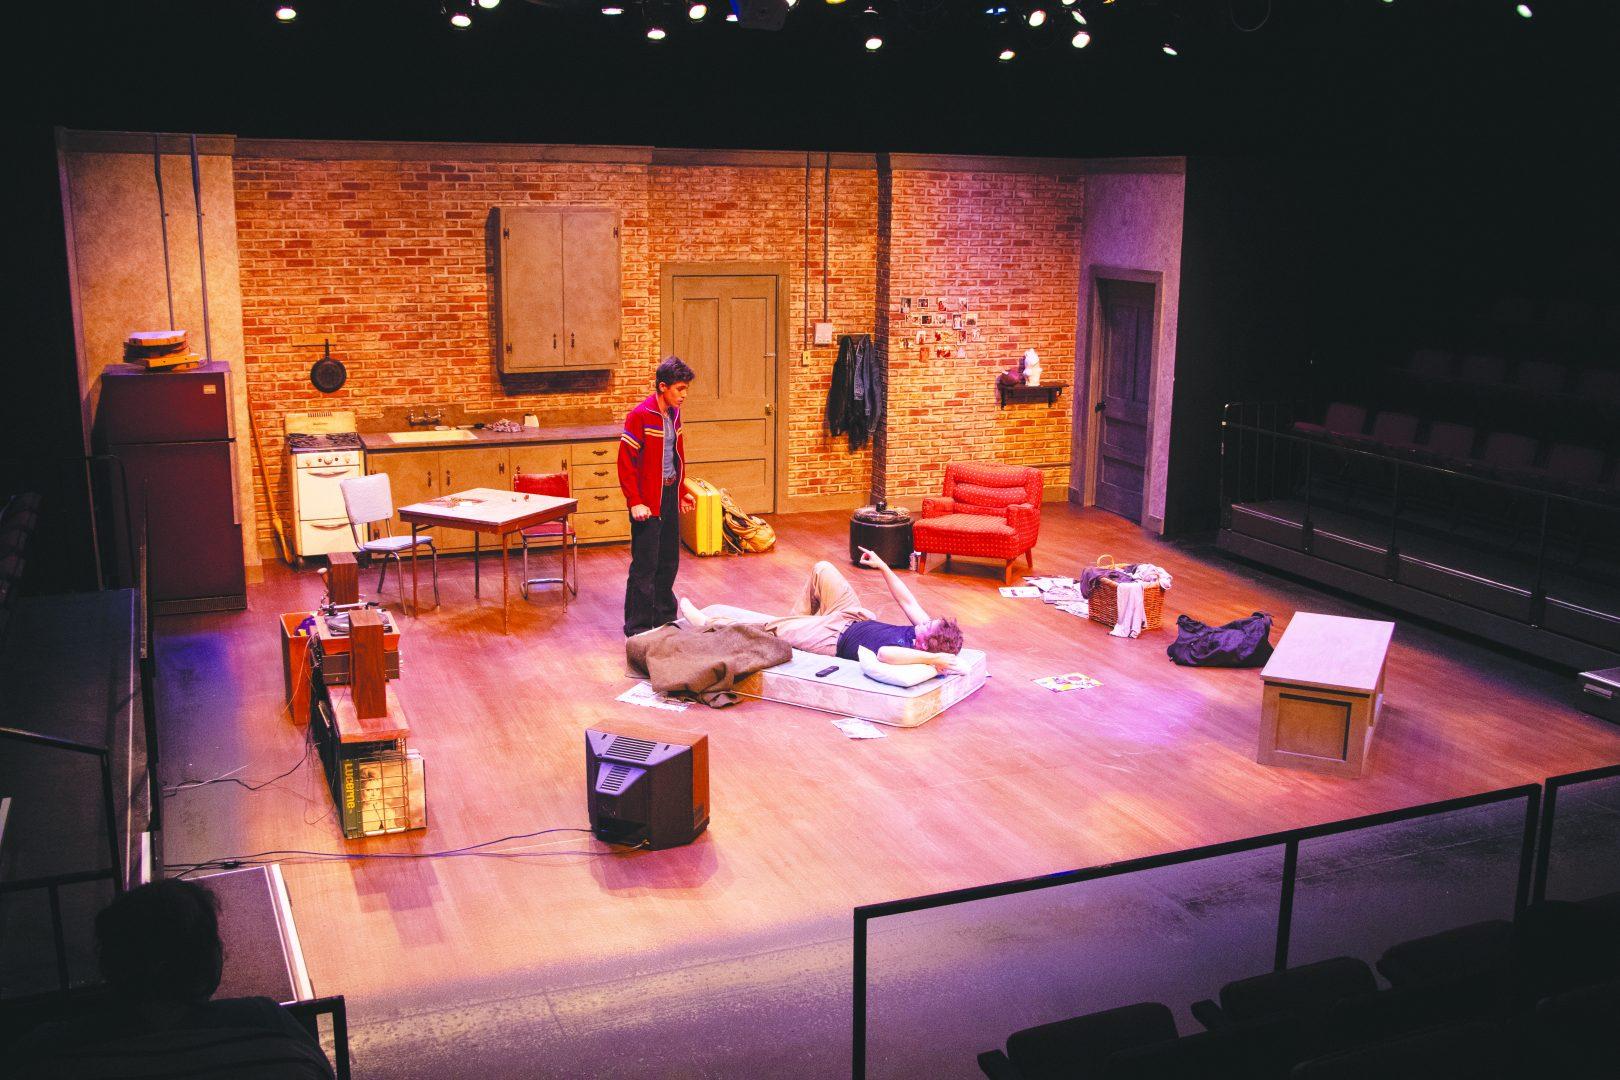 The set of the This Is Our Youth play. (Courtesy of Miguel A. Gastelum)